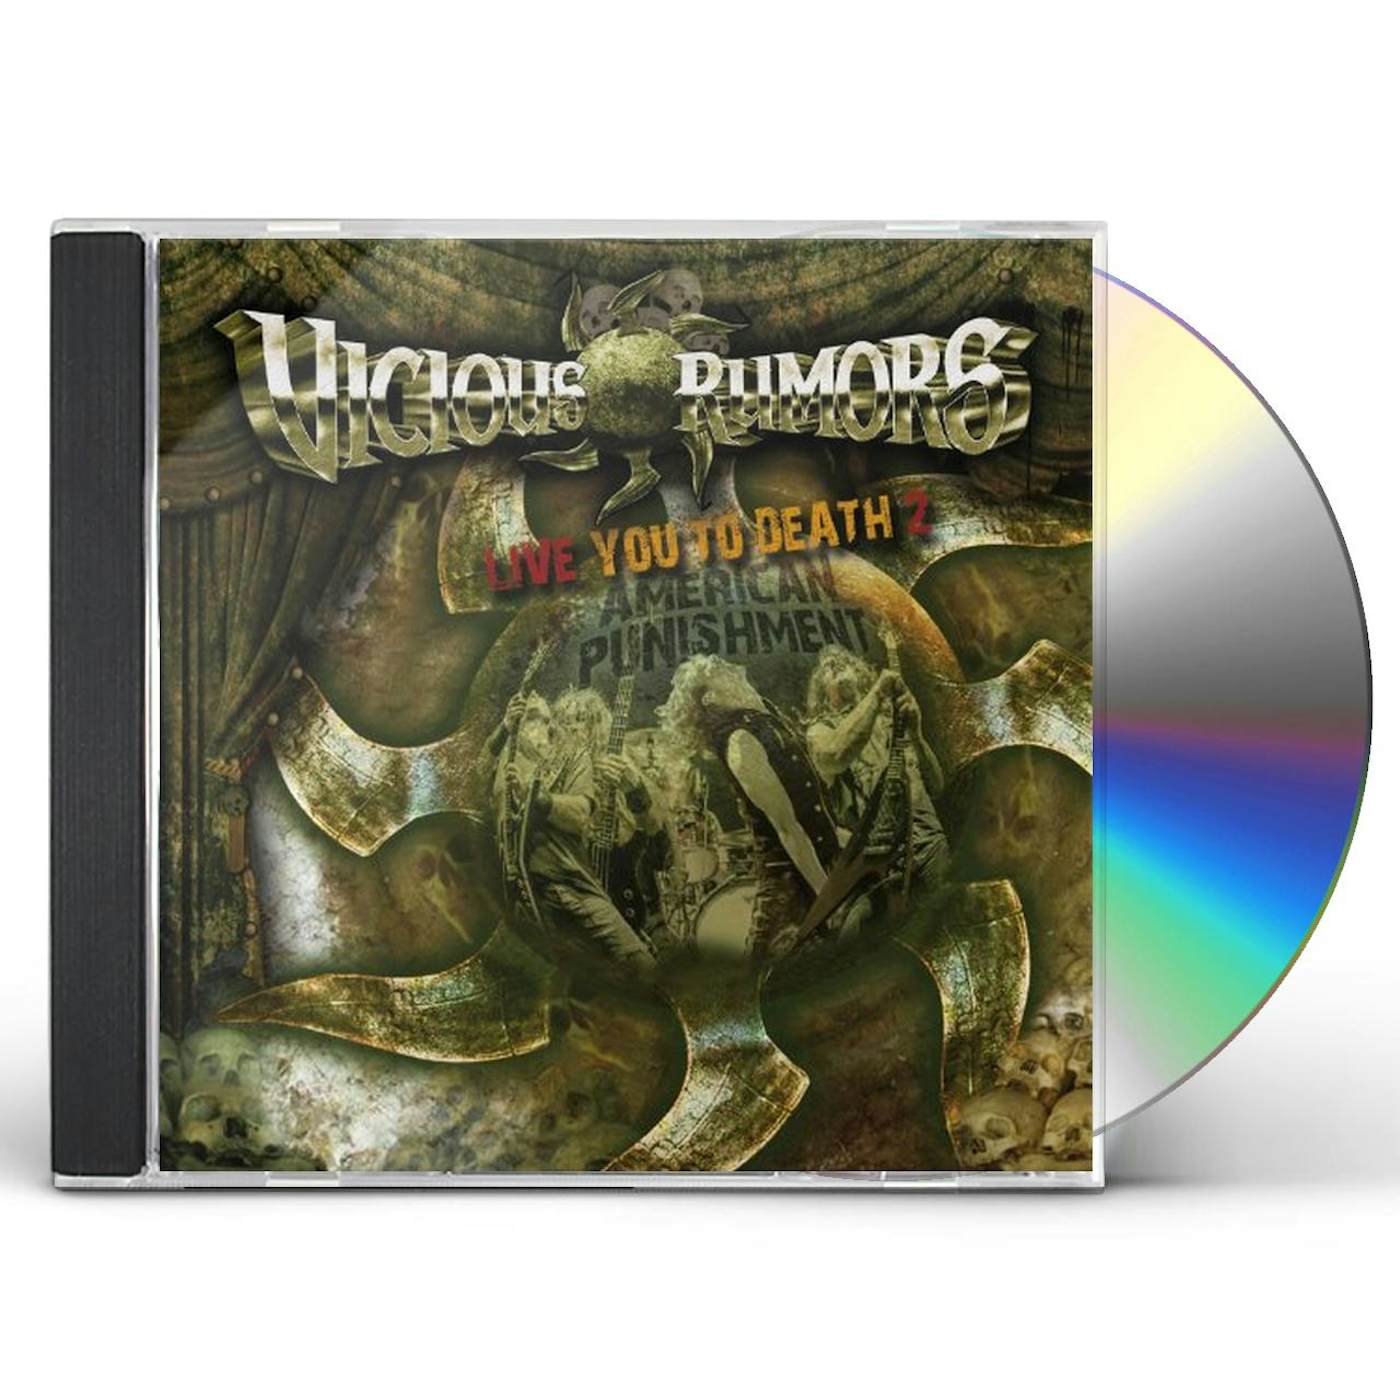 Vicious Rumors LIVE YOU TO DEATH 2-AMERICAN PUNISHMENT CD